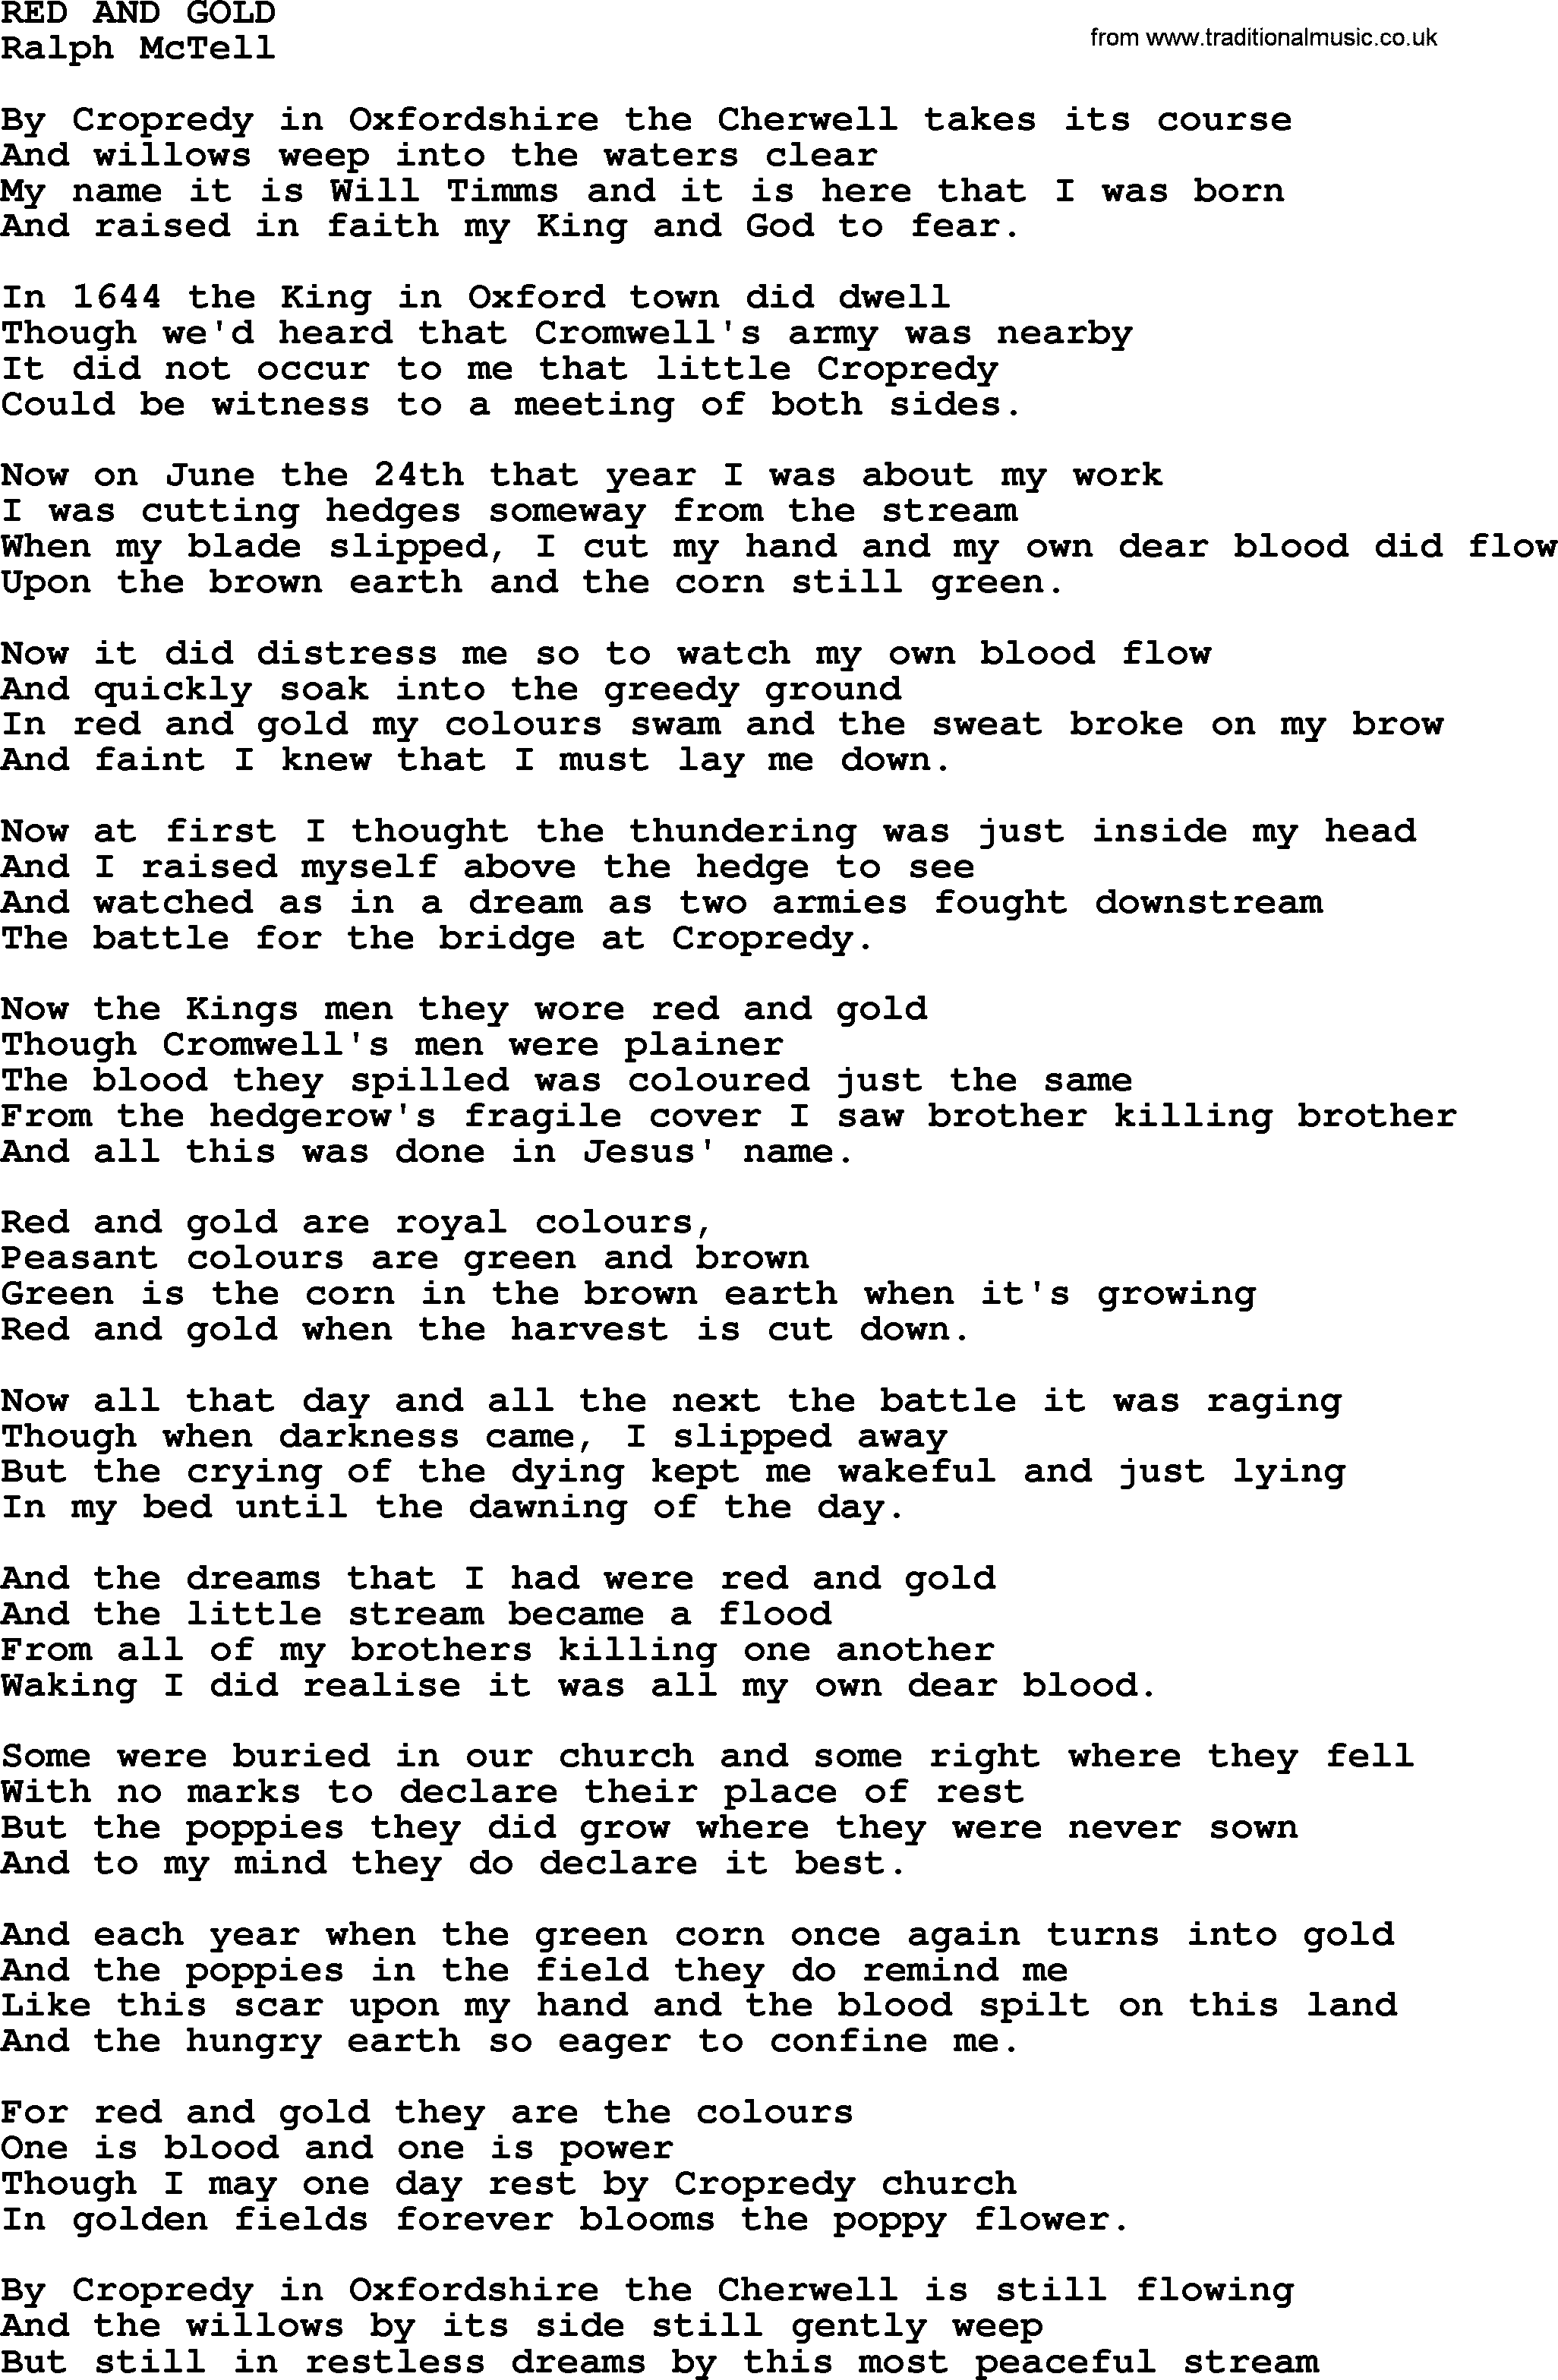 Ralph McTell Song: Red And Gold, lyrics